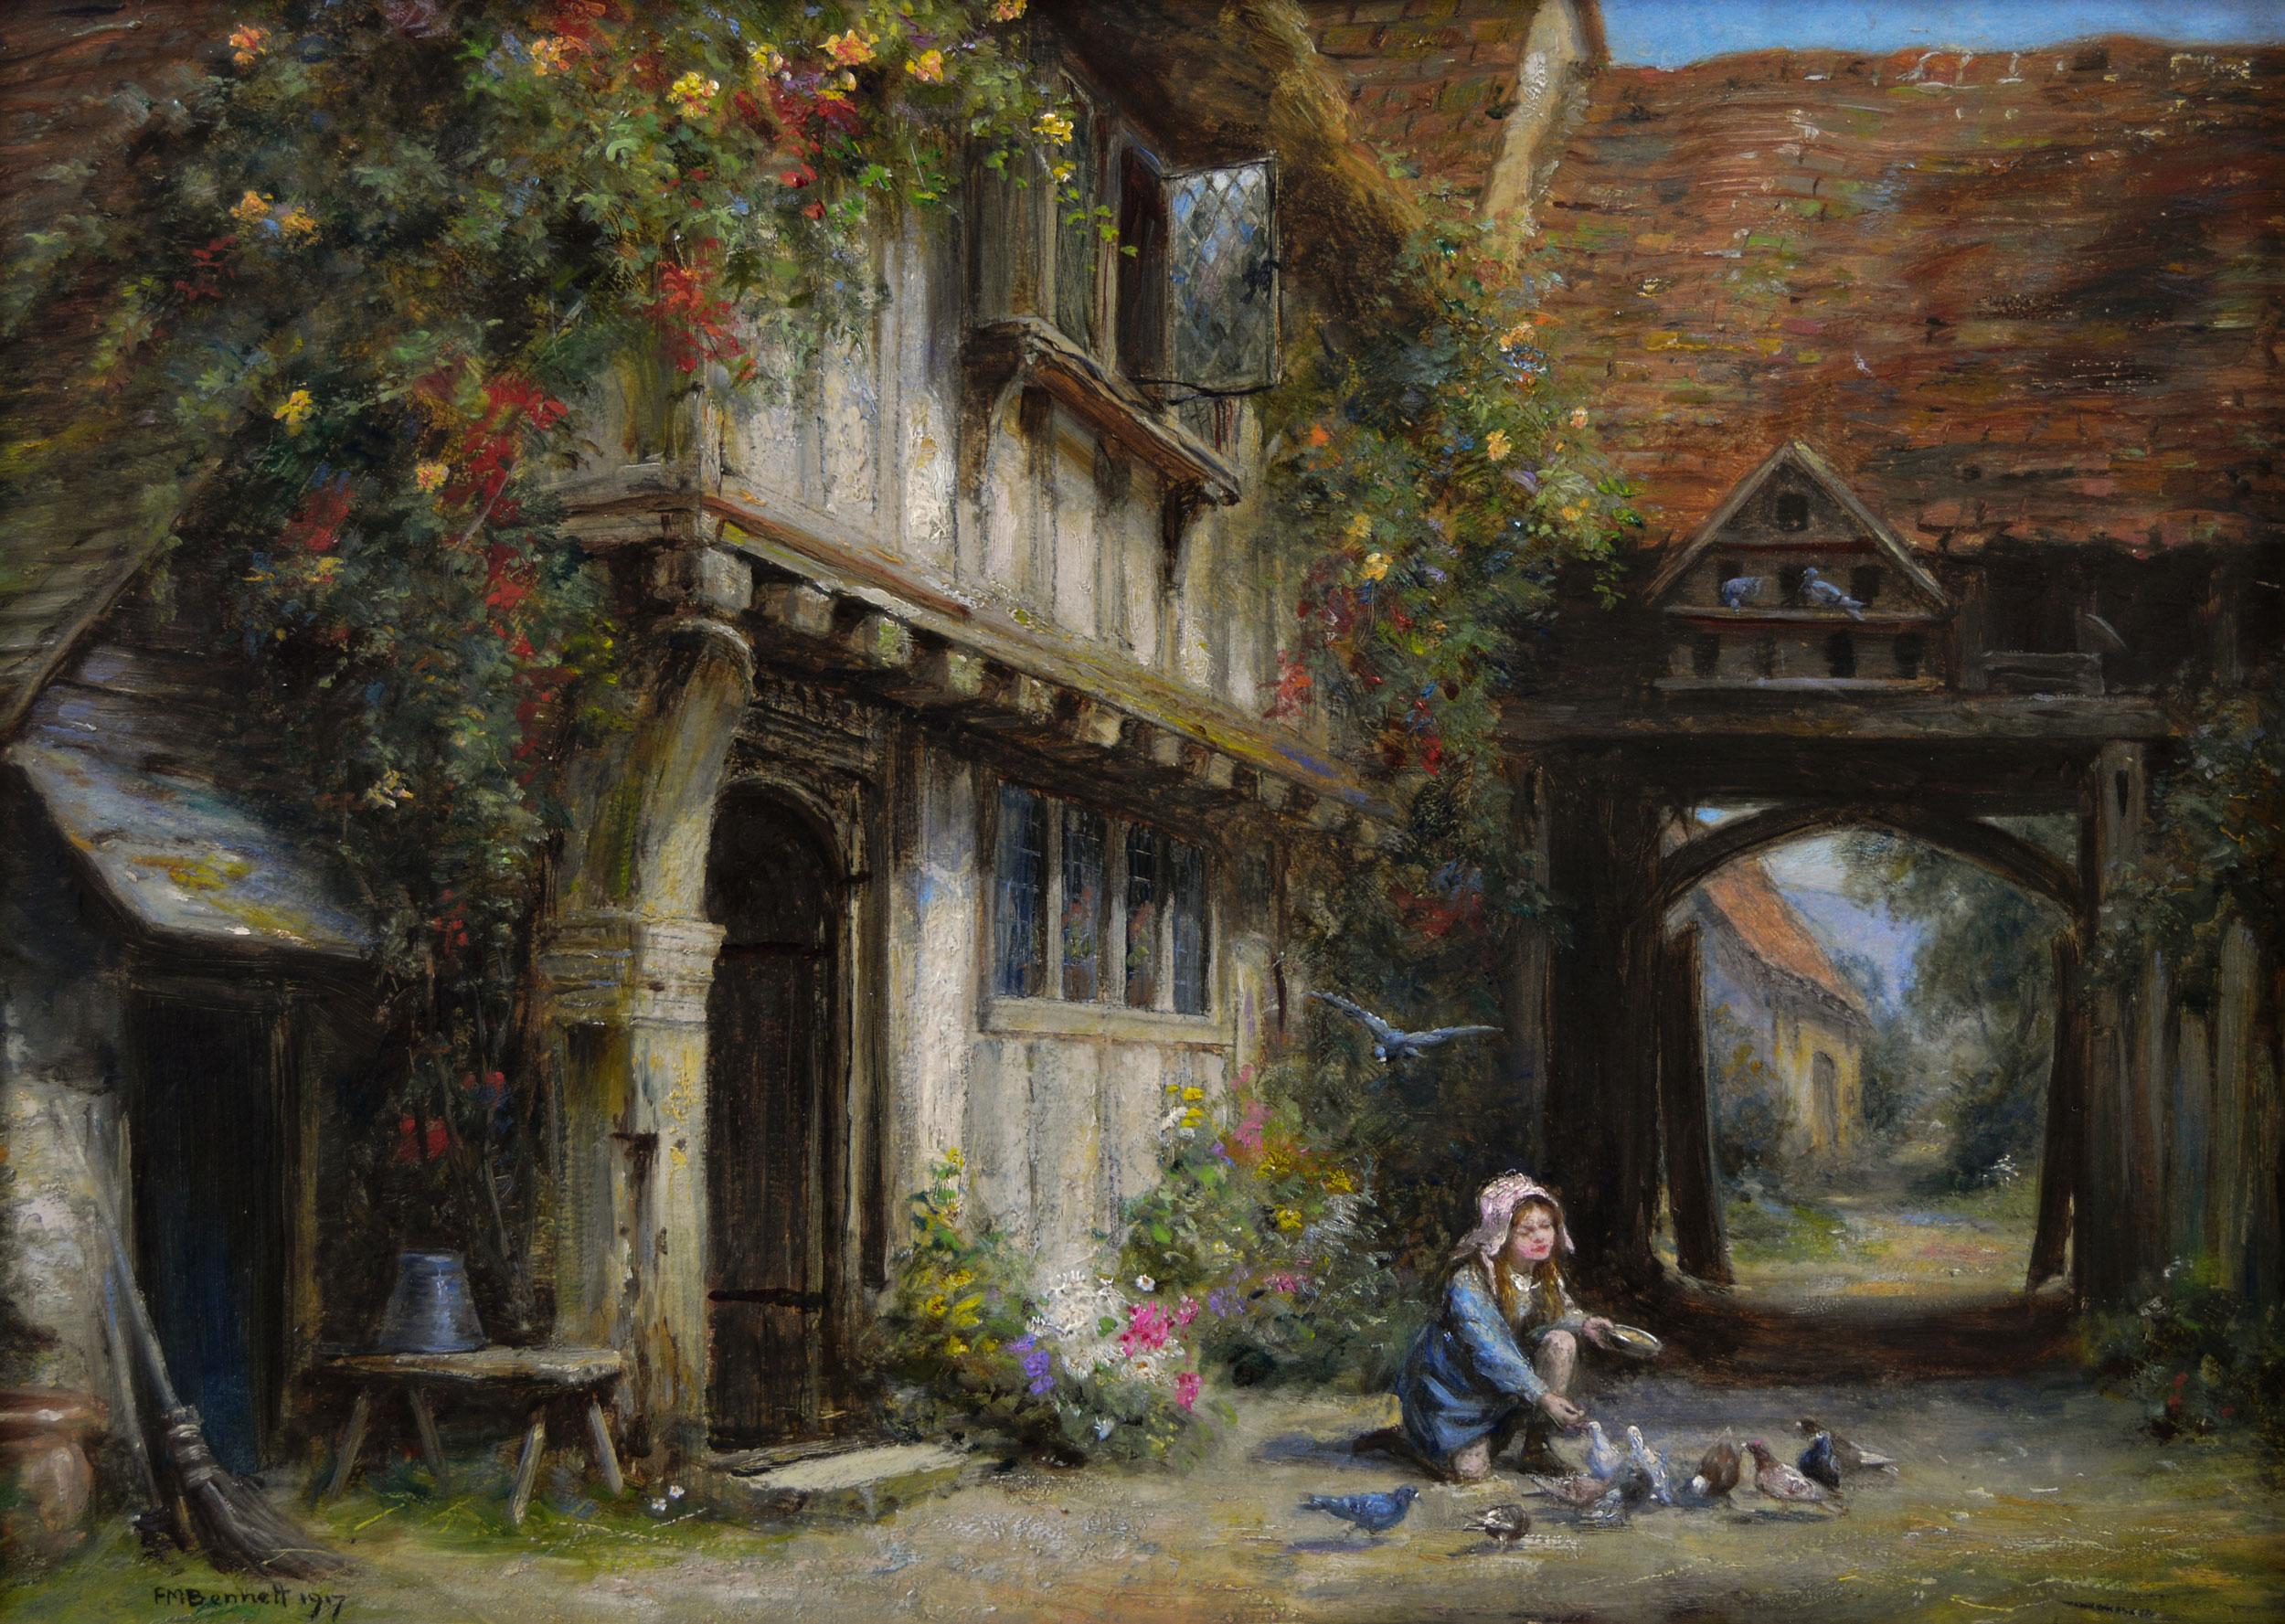 Genre oil painting of a girl feeding pigeons outside a house - Painting by Frank Moss Bennett